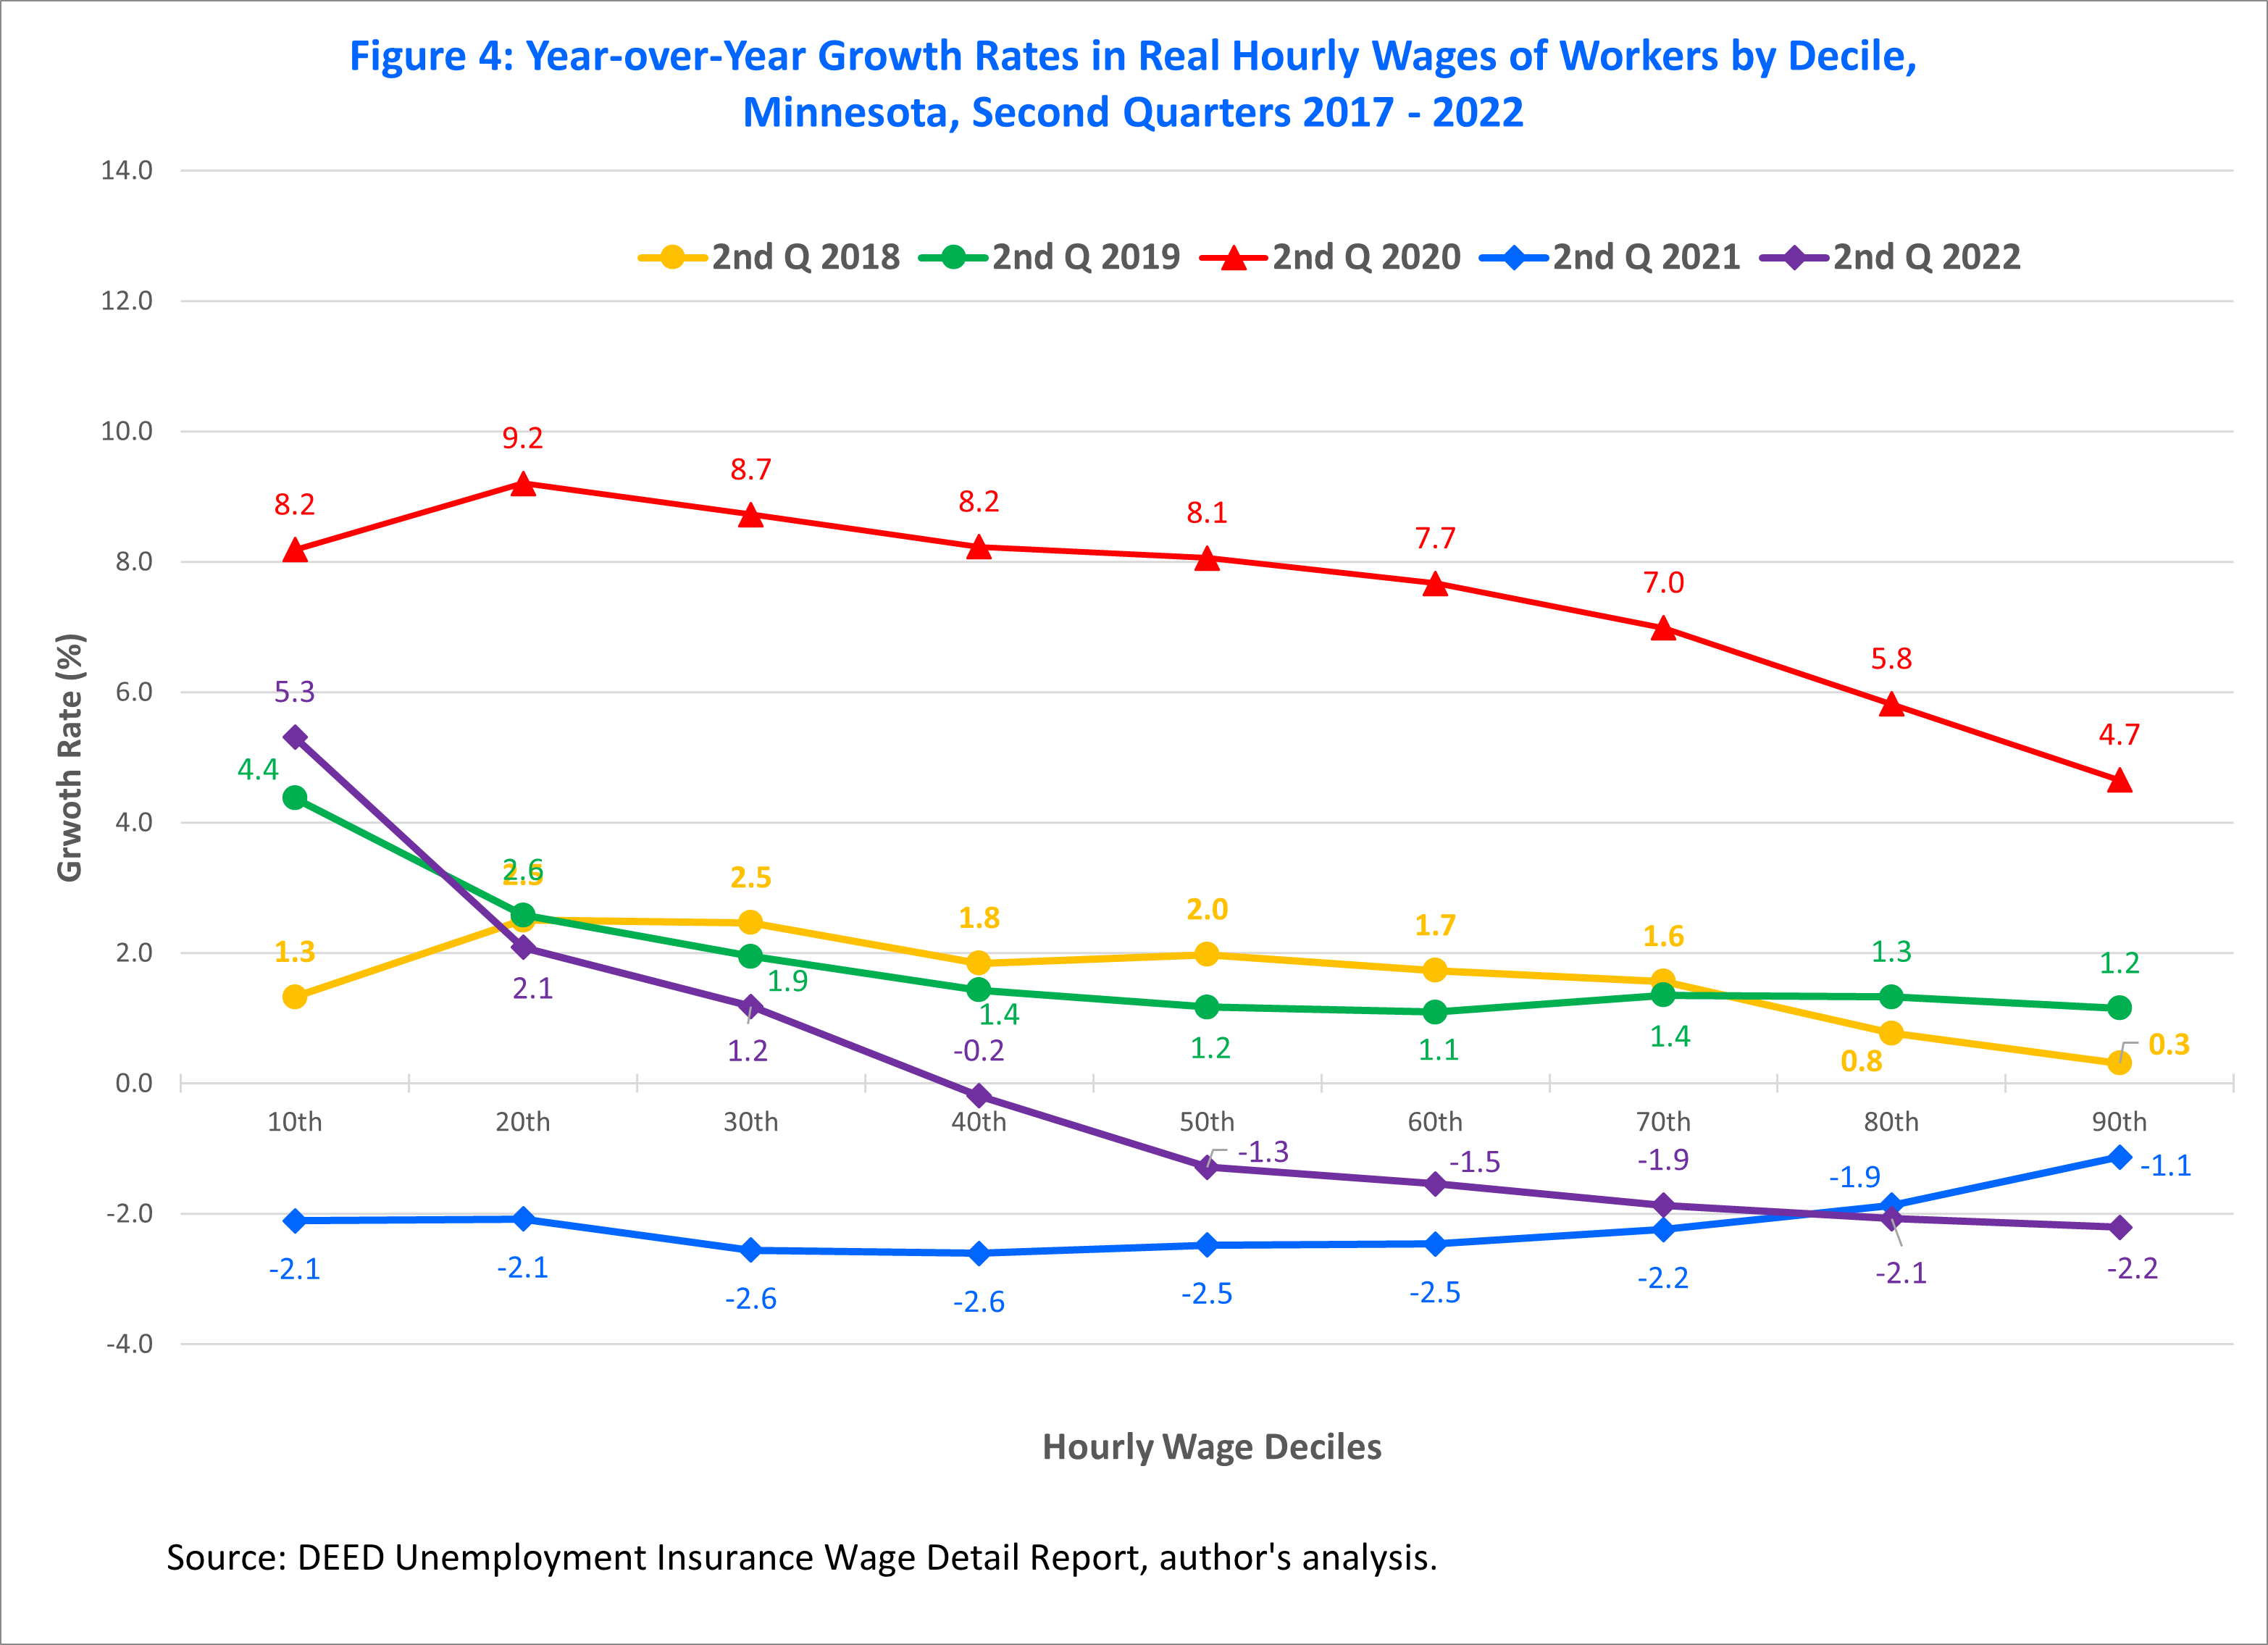 Year-over-Year Growth Rates in Real Hourly Wage of Workers by Decile